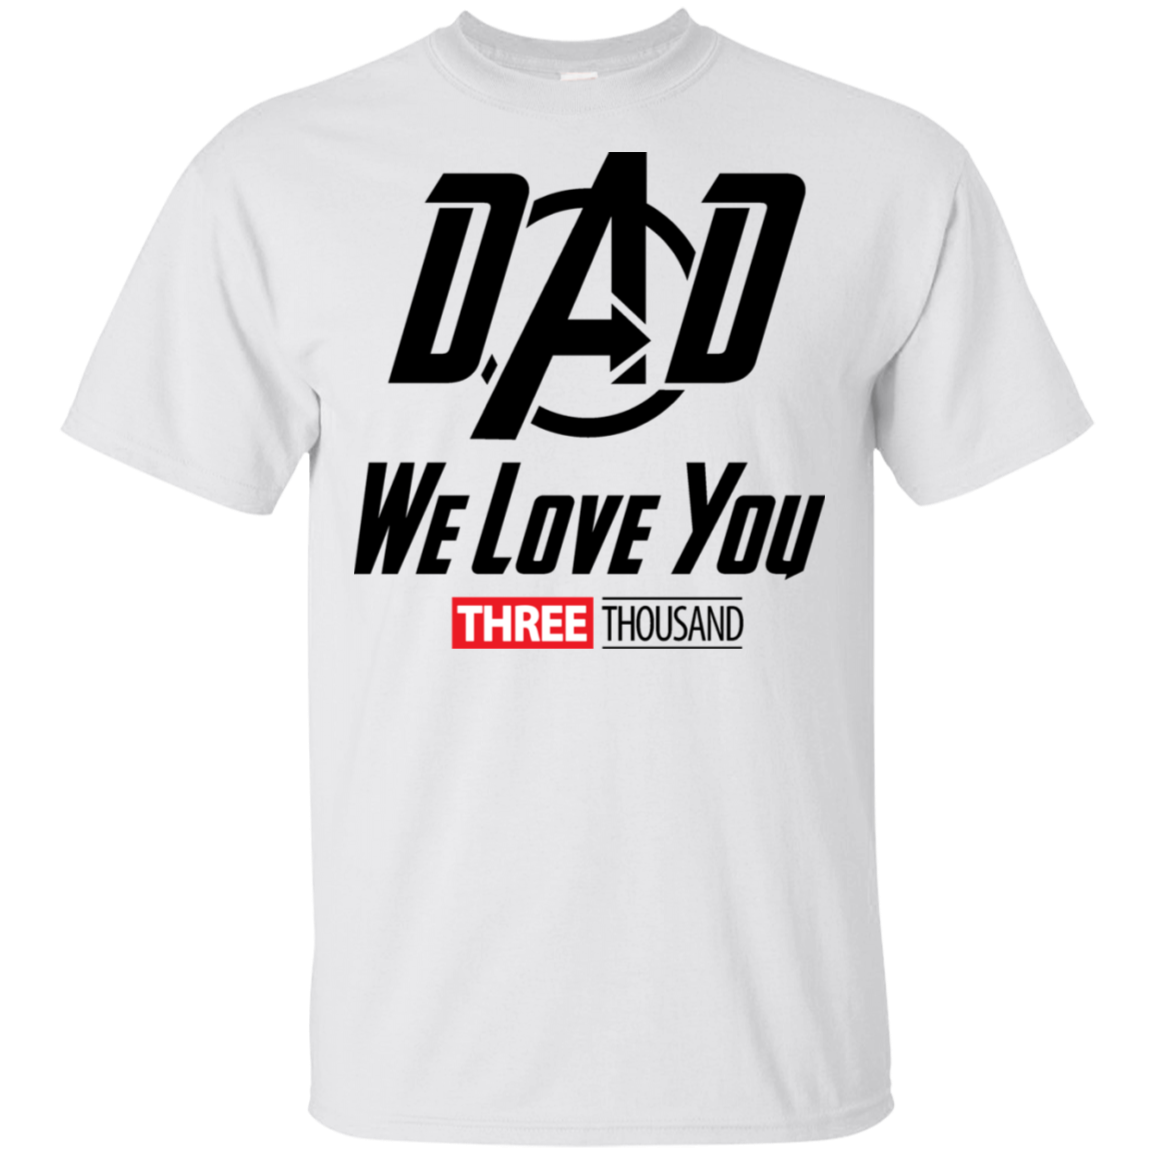 Dad We Love You - T-Shirt